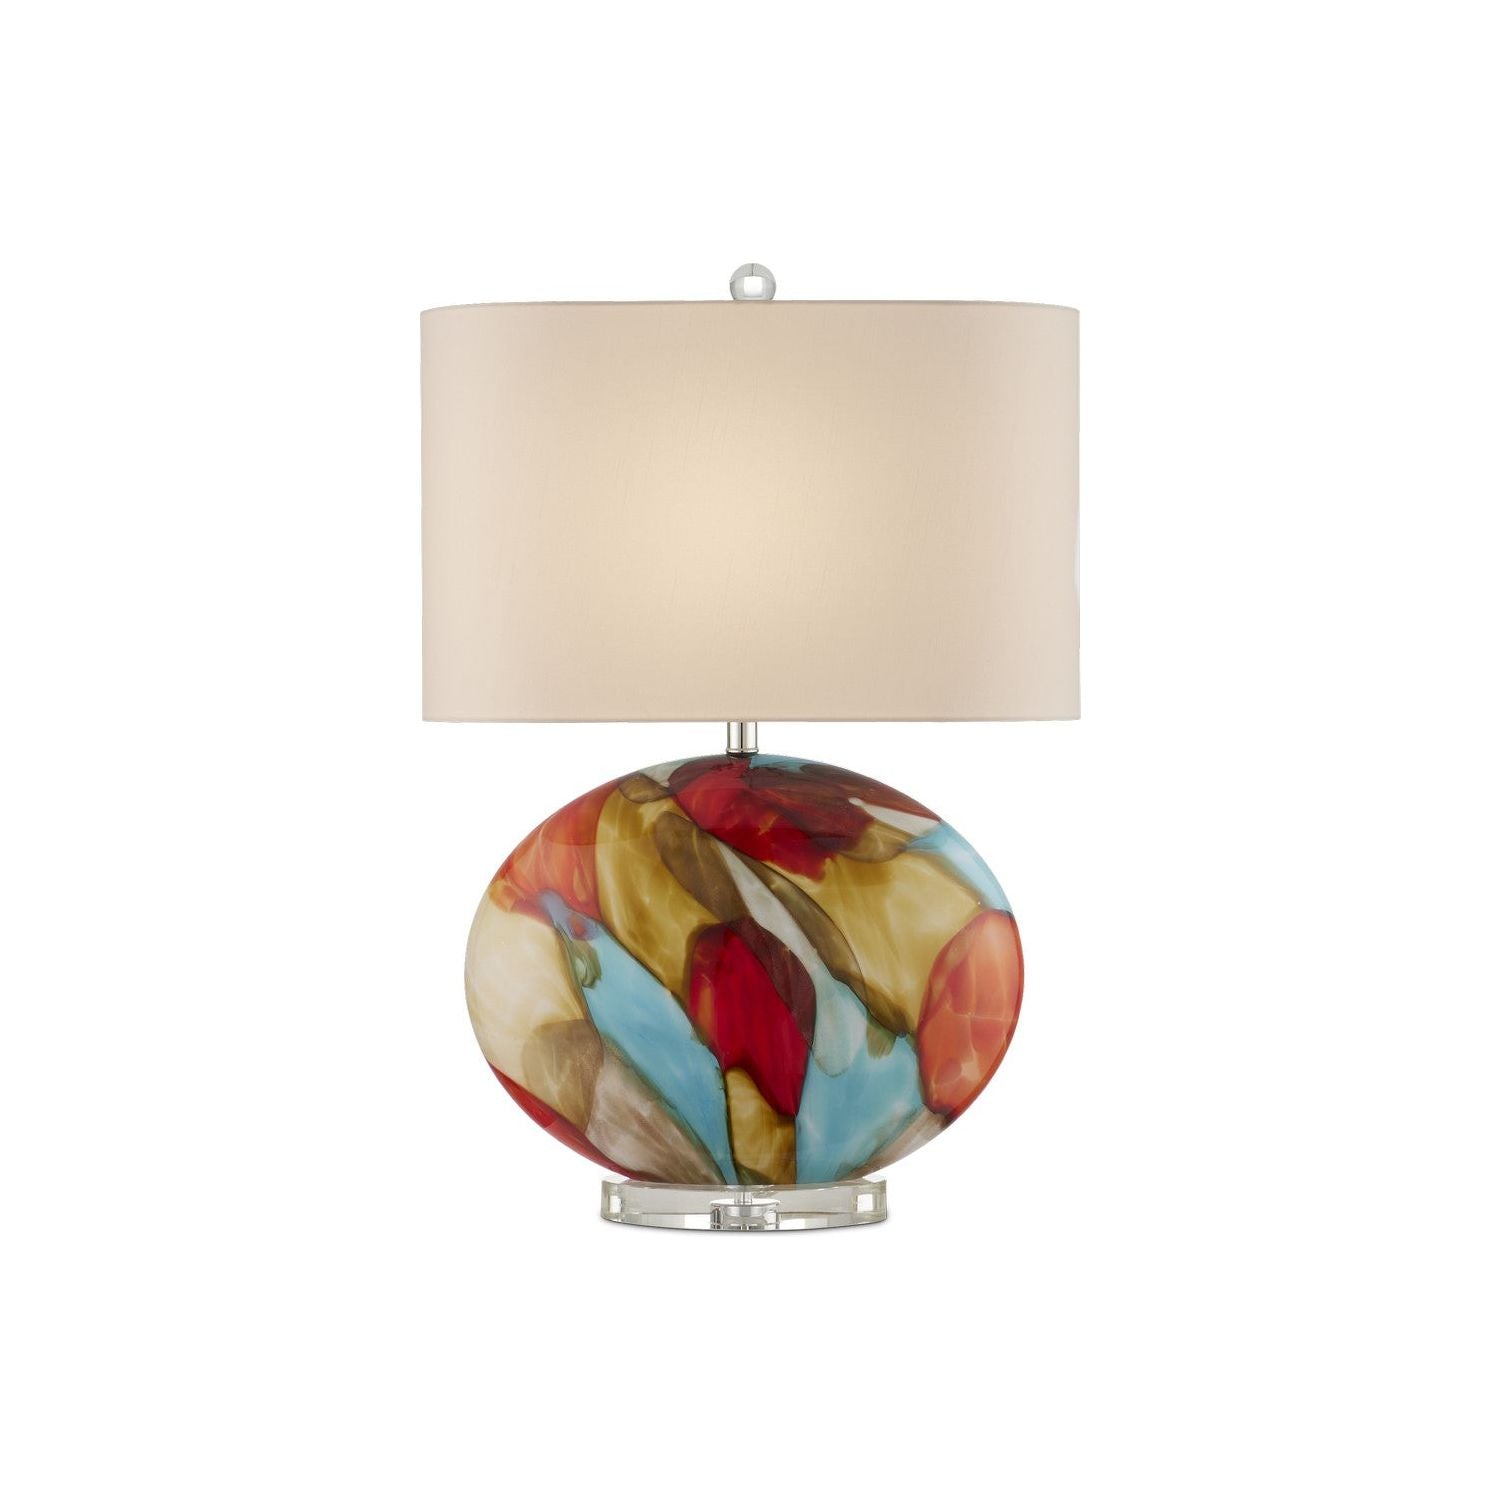 Currey and Company - 6000-0944 - One Light Table Lamp - Red/Blue/Yellow/Off-White/Clear/Polished Nickel